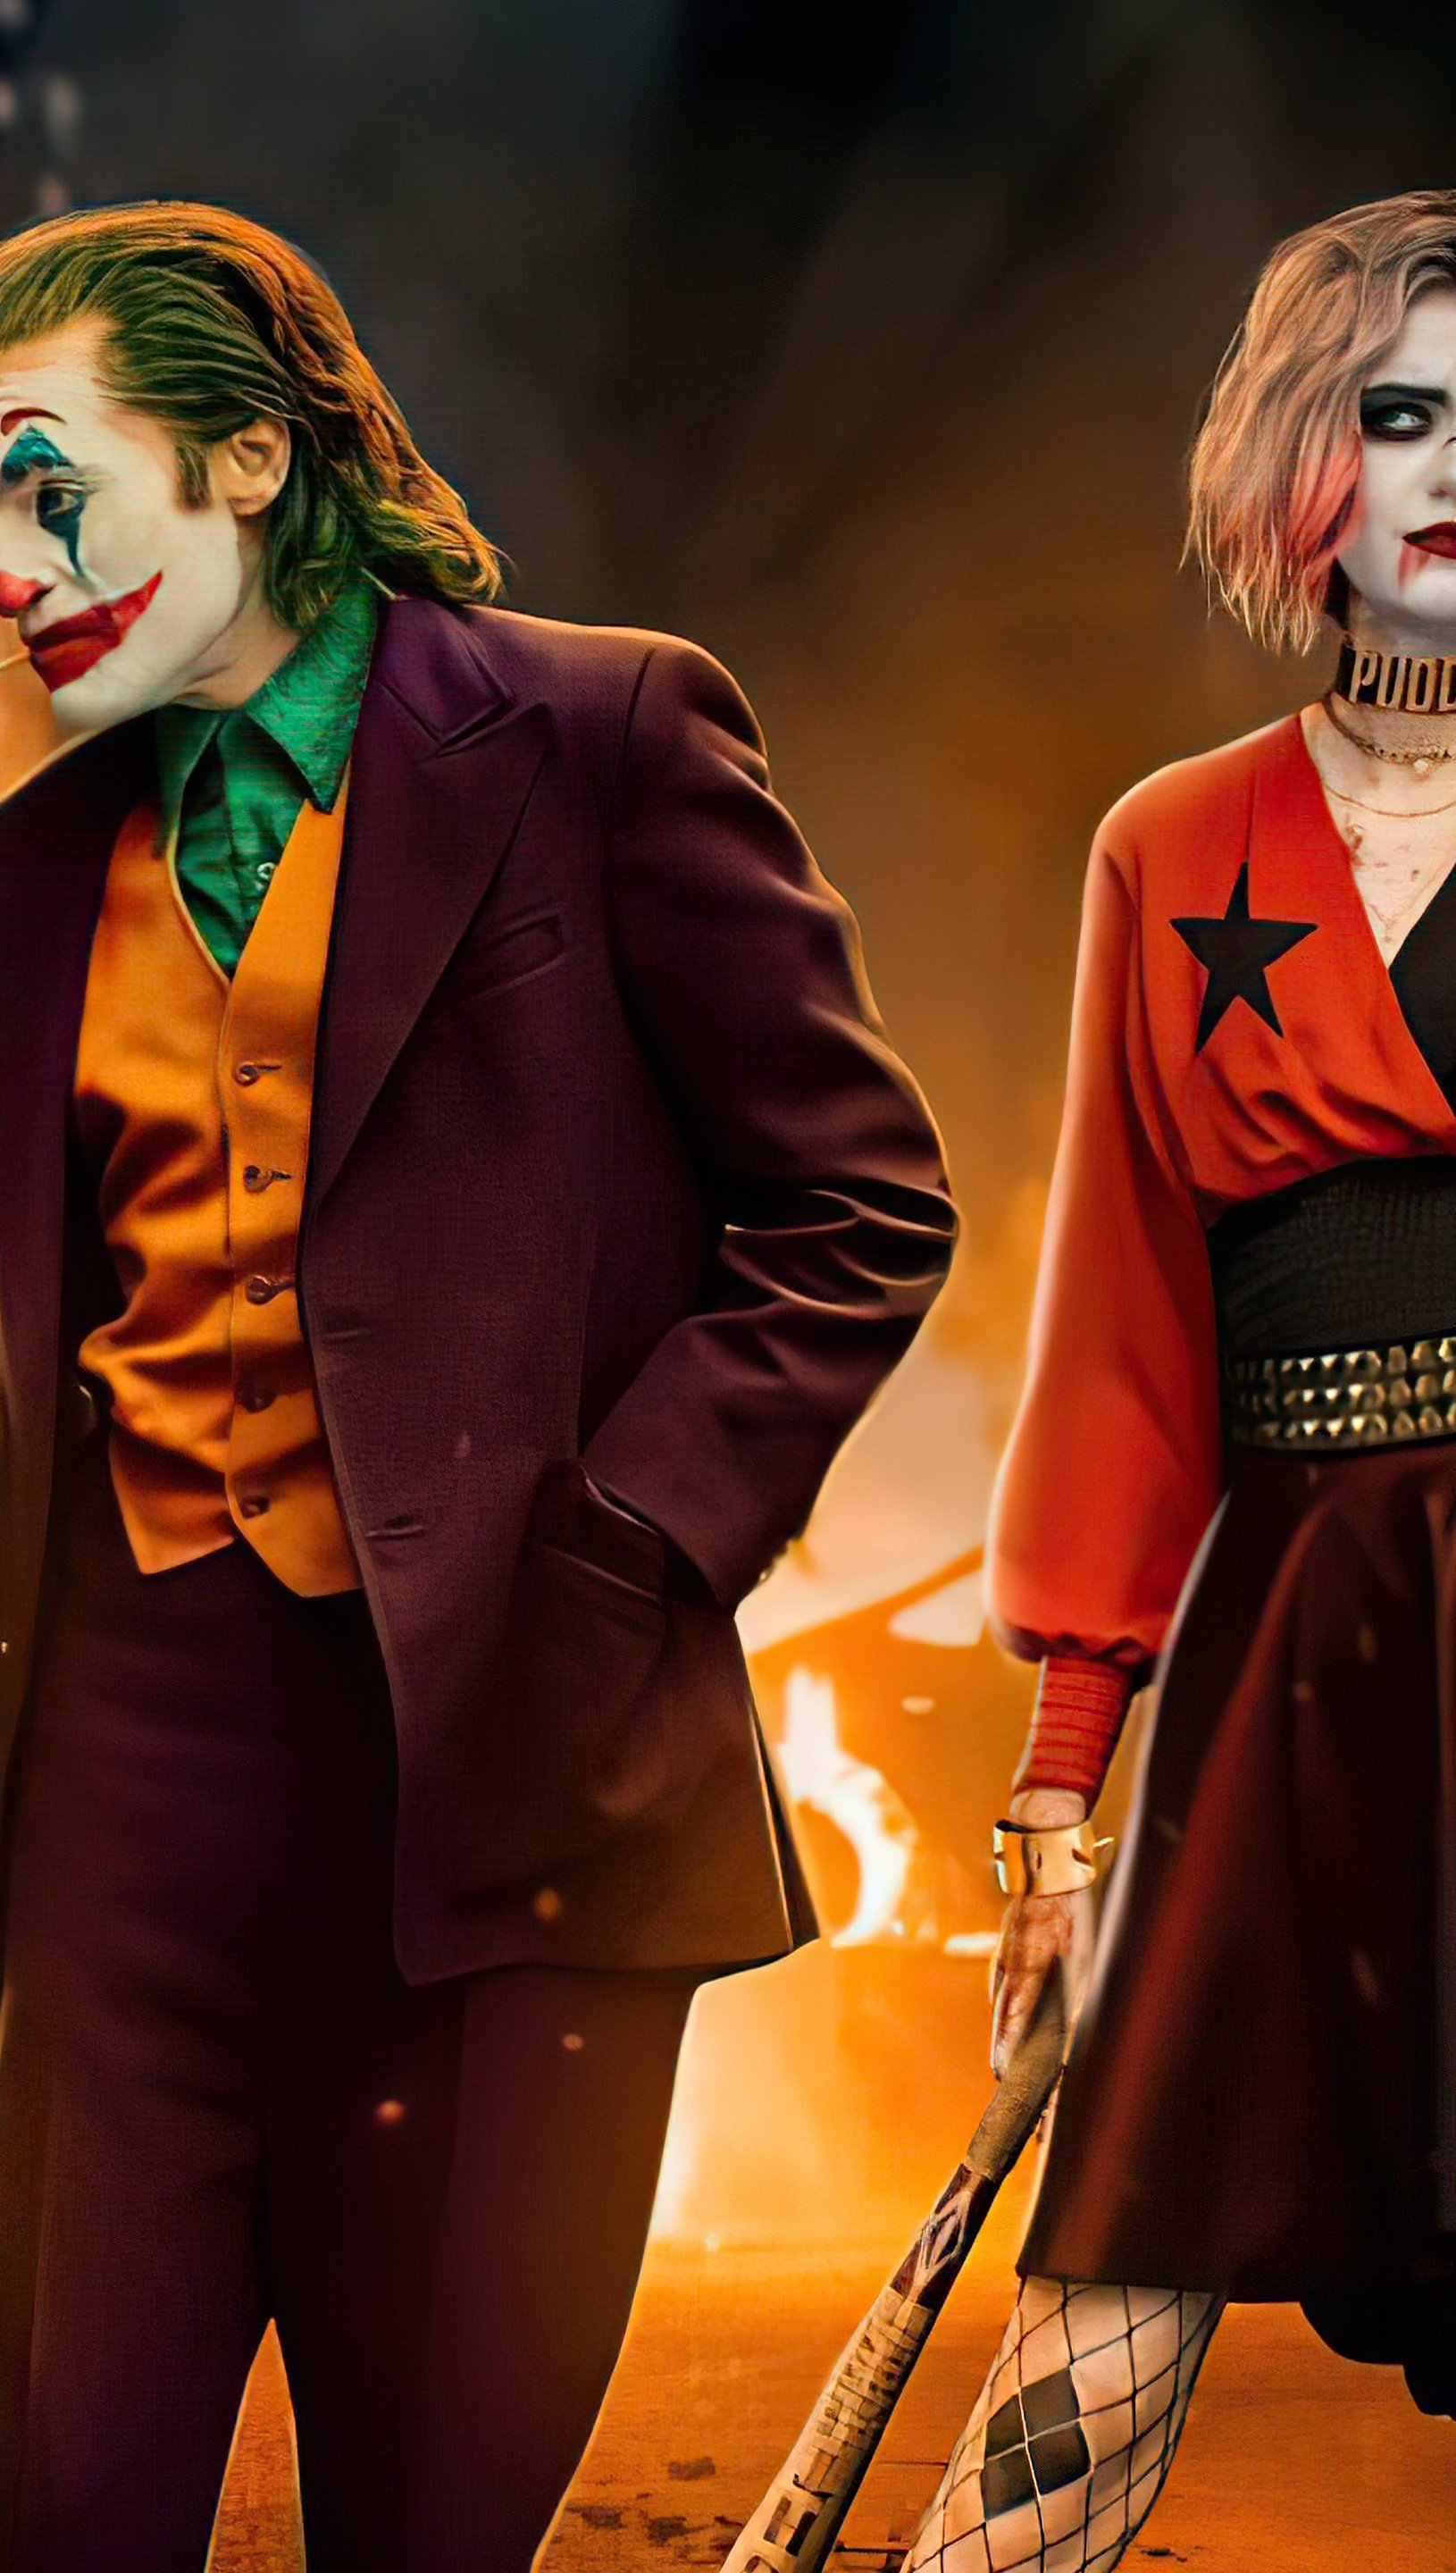 The joker and the queen